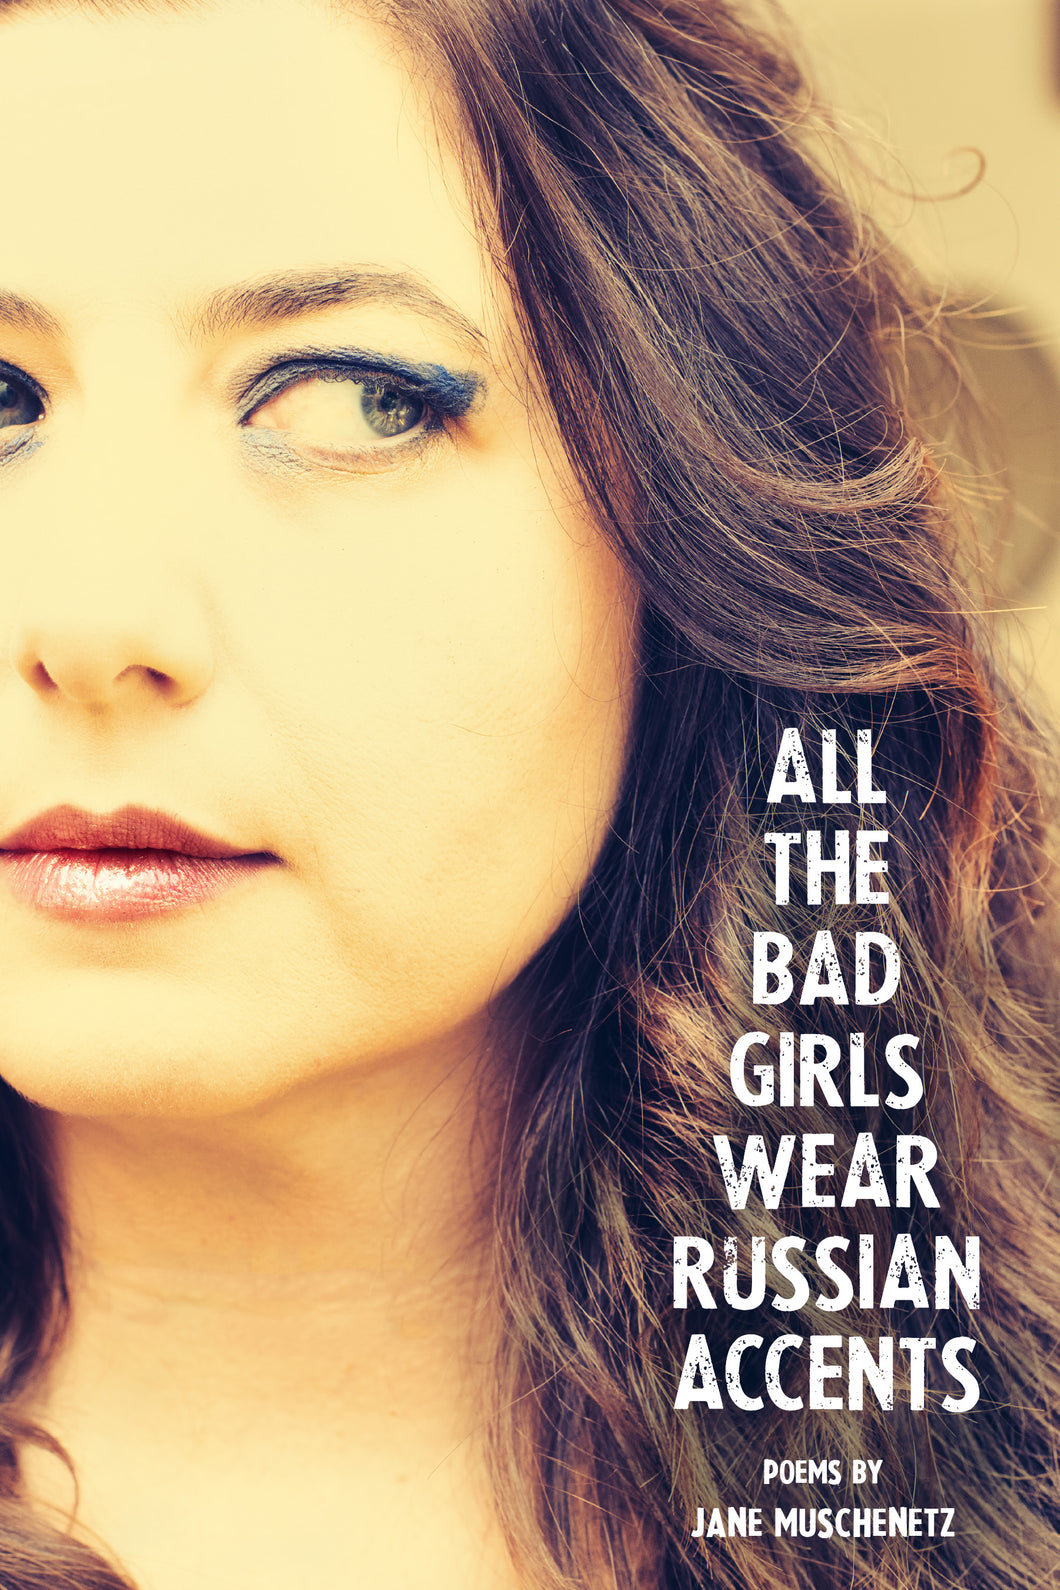 All the Bad Girls Wear Russian Accents